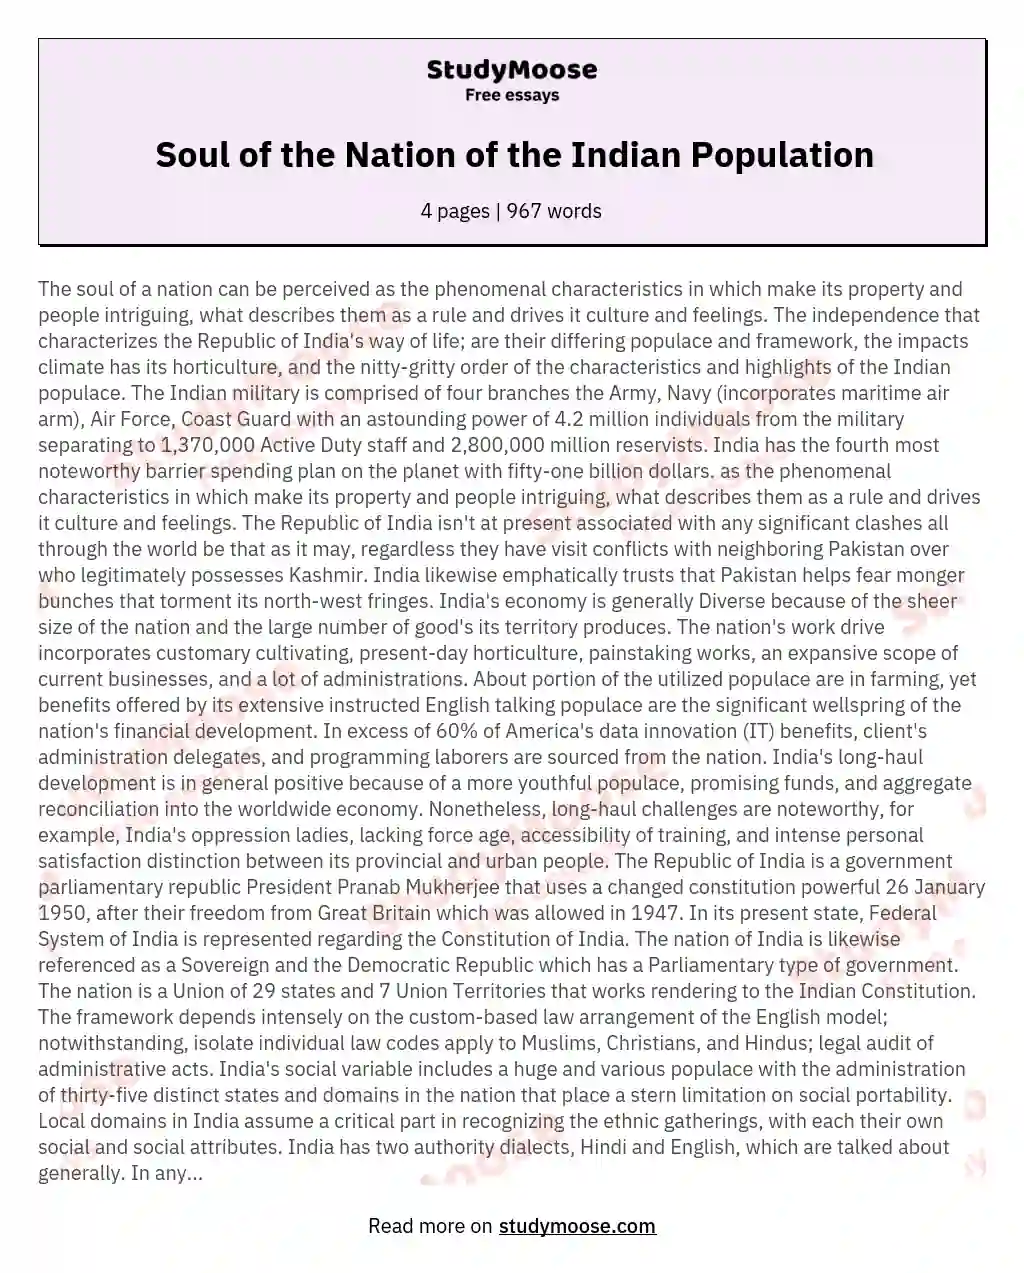 Soul of the Nation of the Indian Population essay